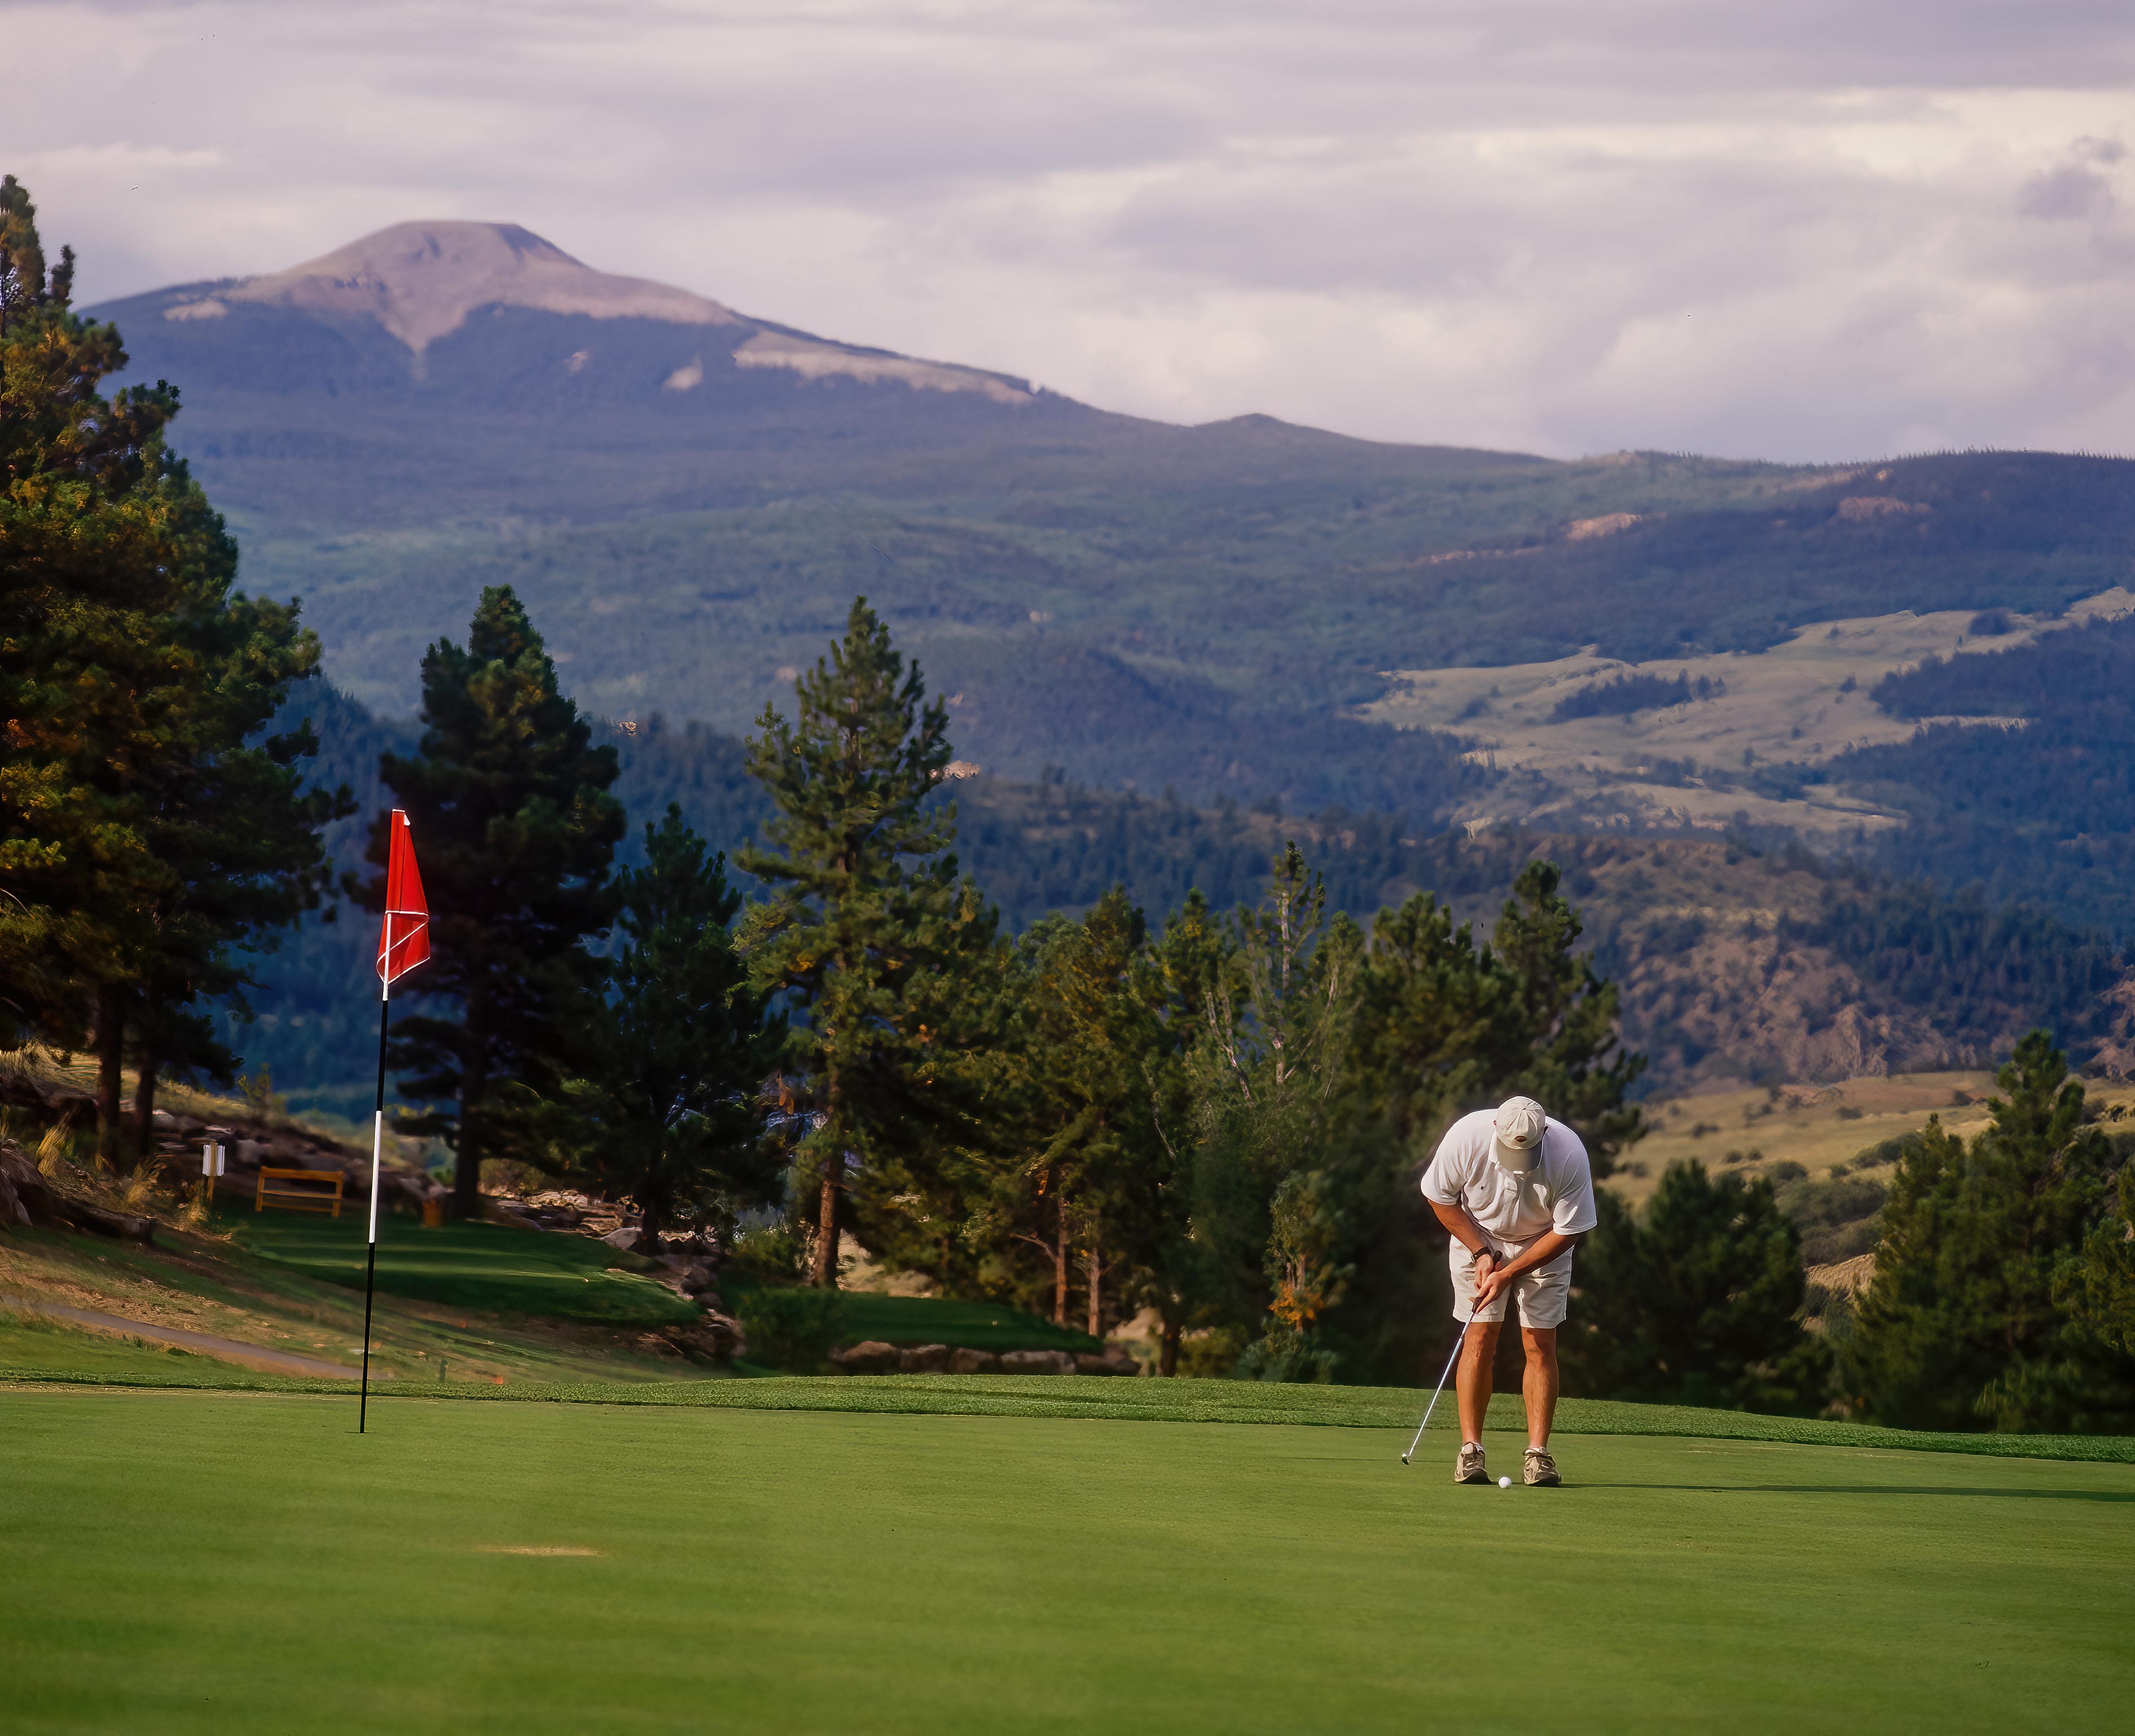 Golfer putting on golf course in mountains.